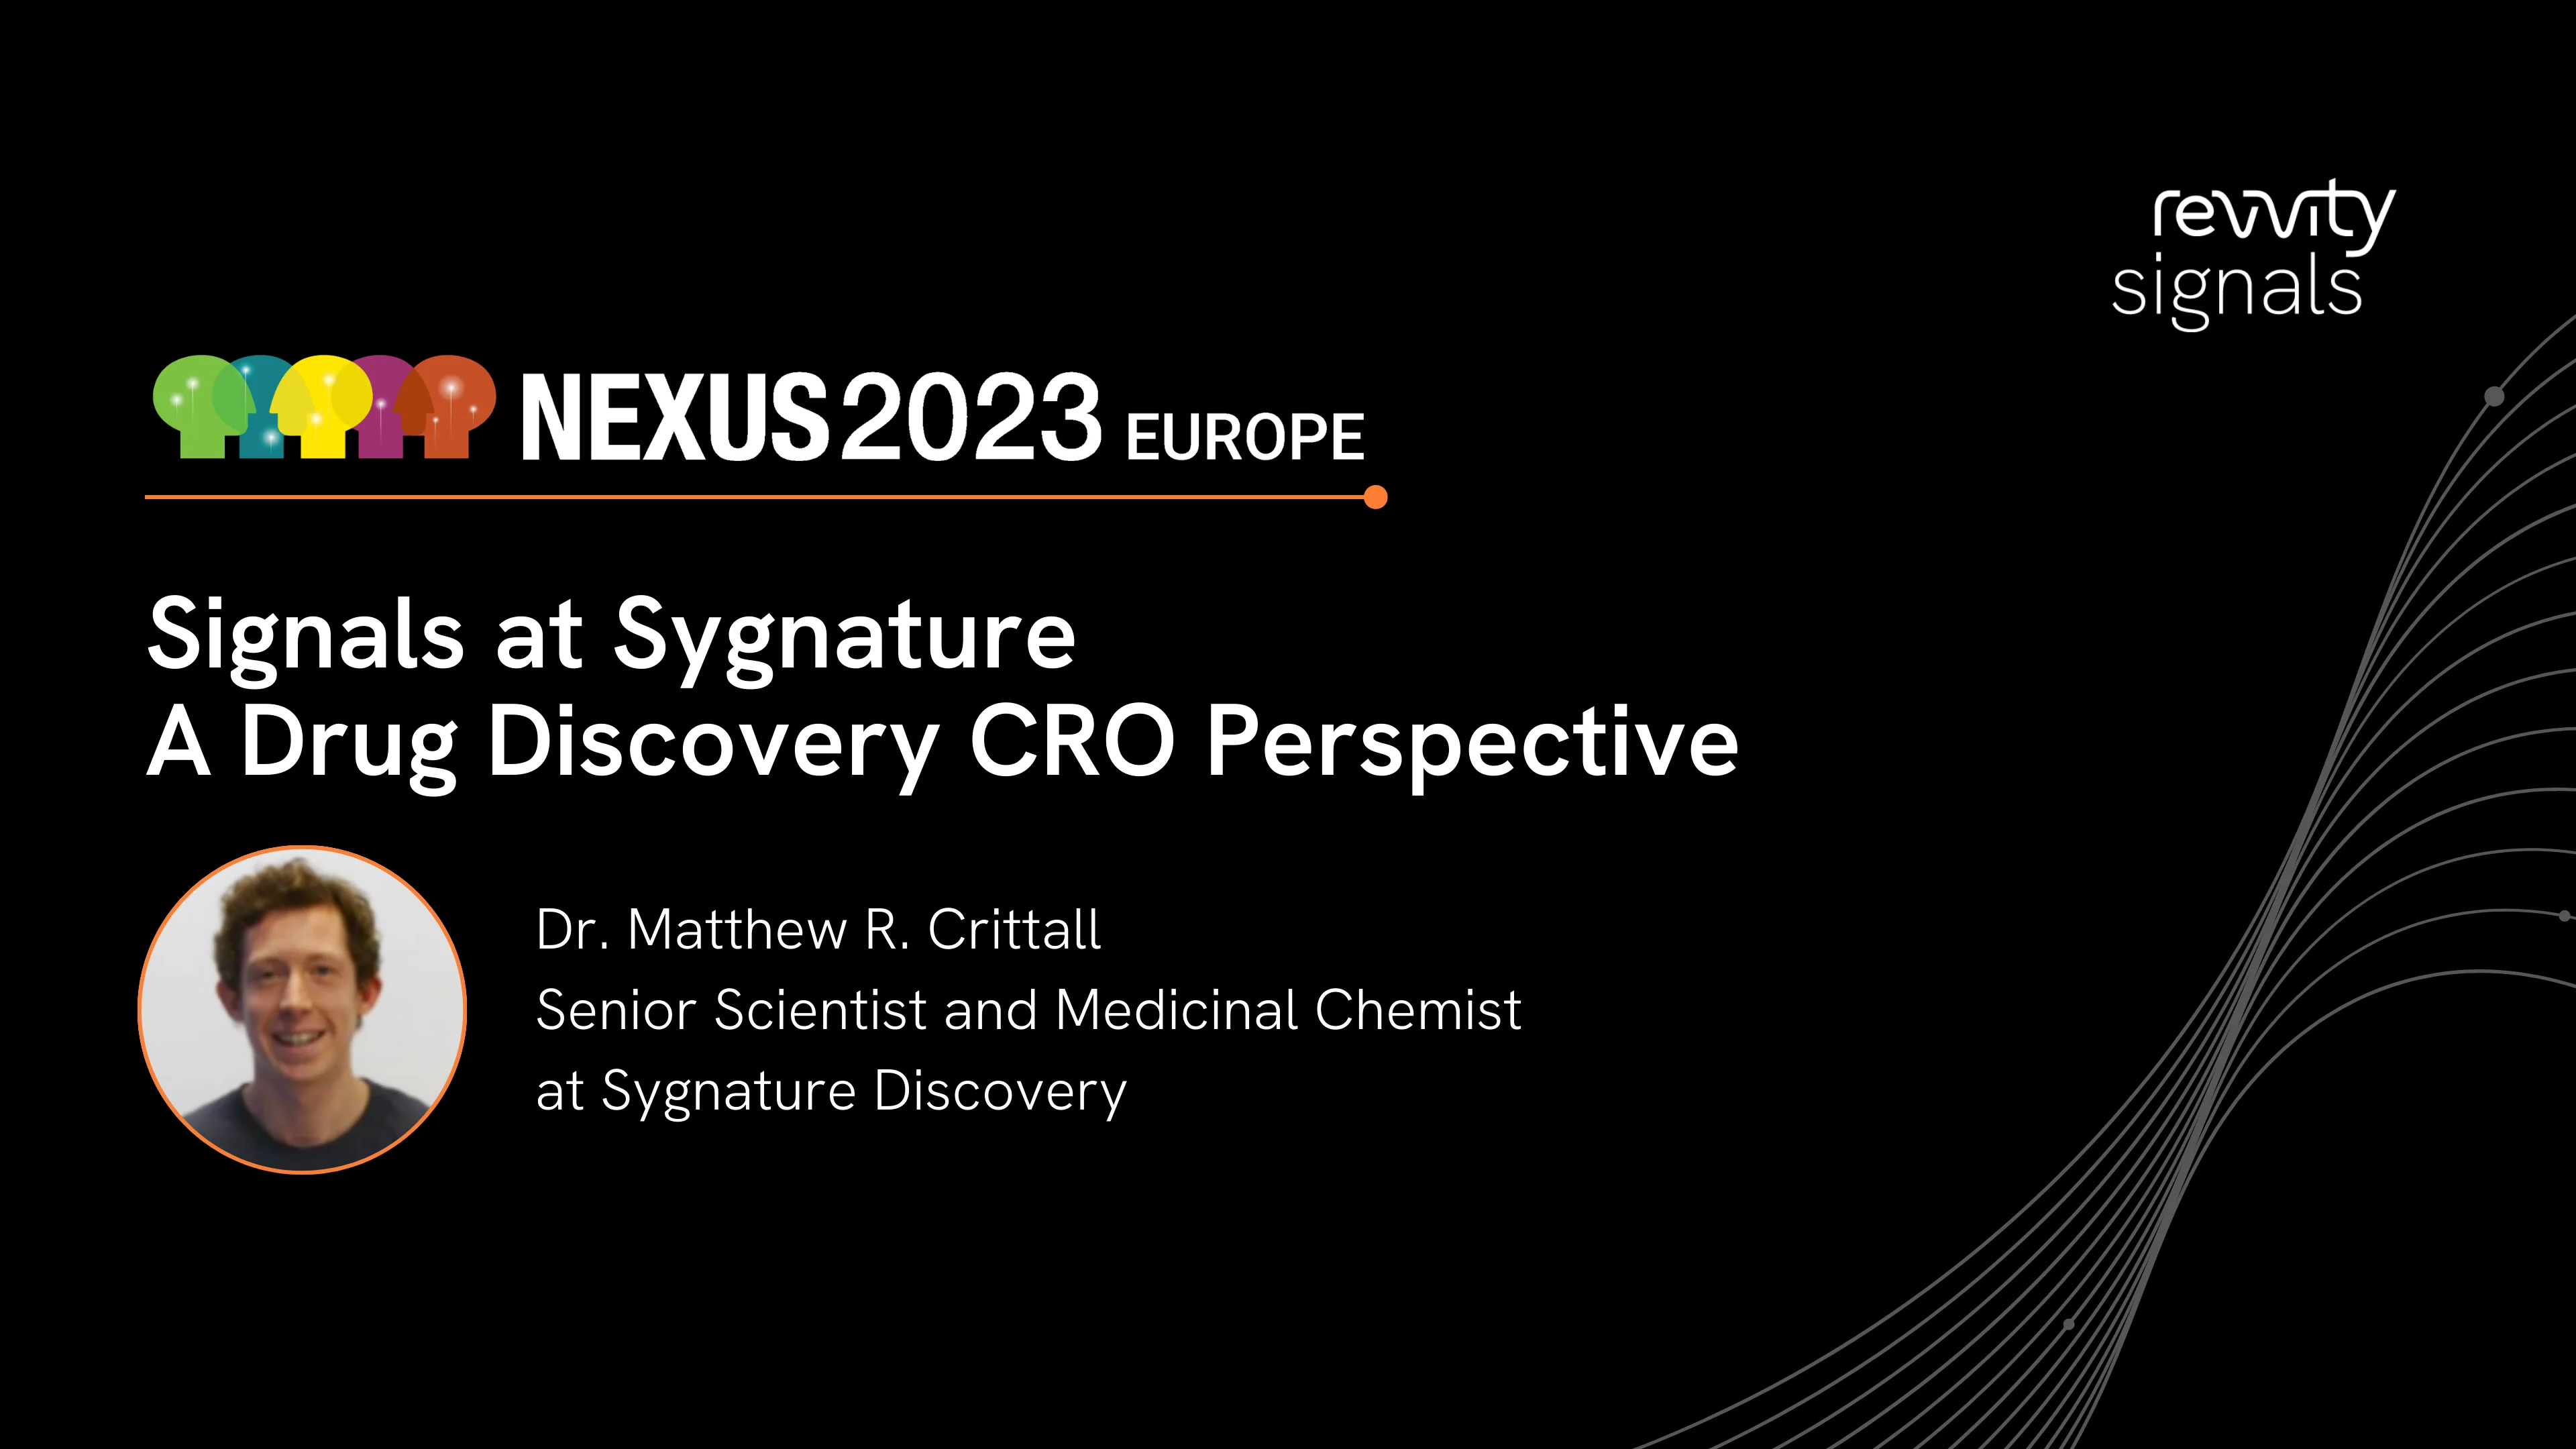 Watch Day 2, EU NEXUS 2023 - Signals at Sygnature - A Drug Discovery CRO Perspective on Vimeo.